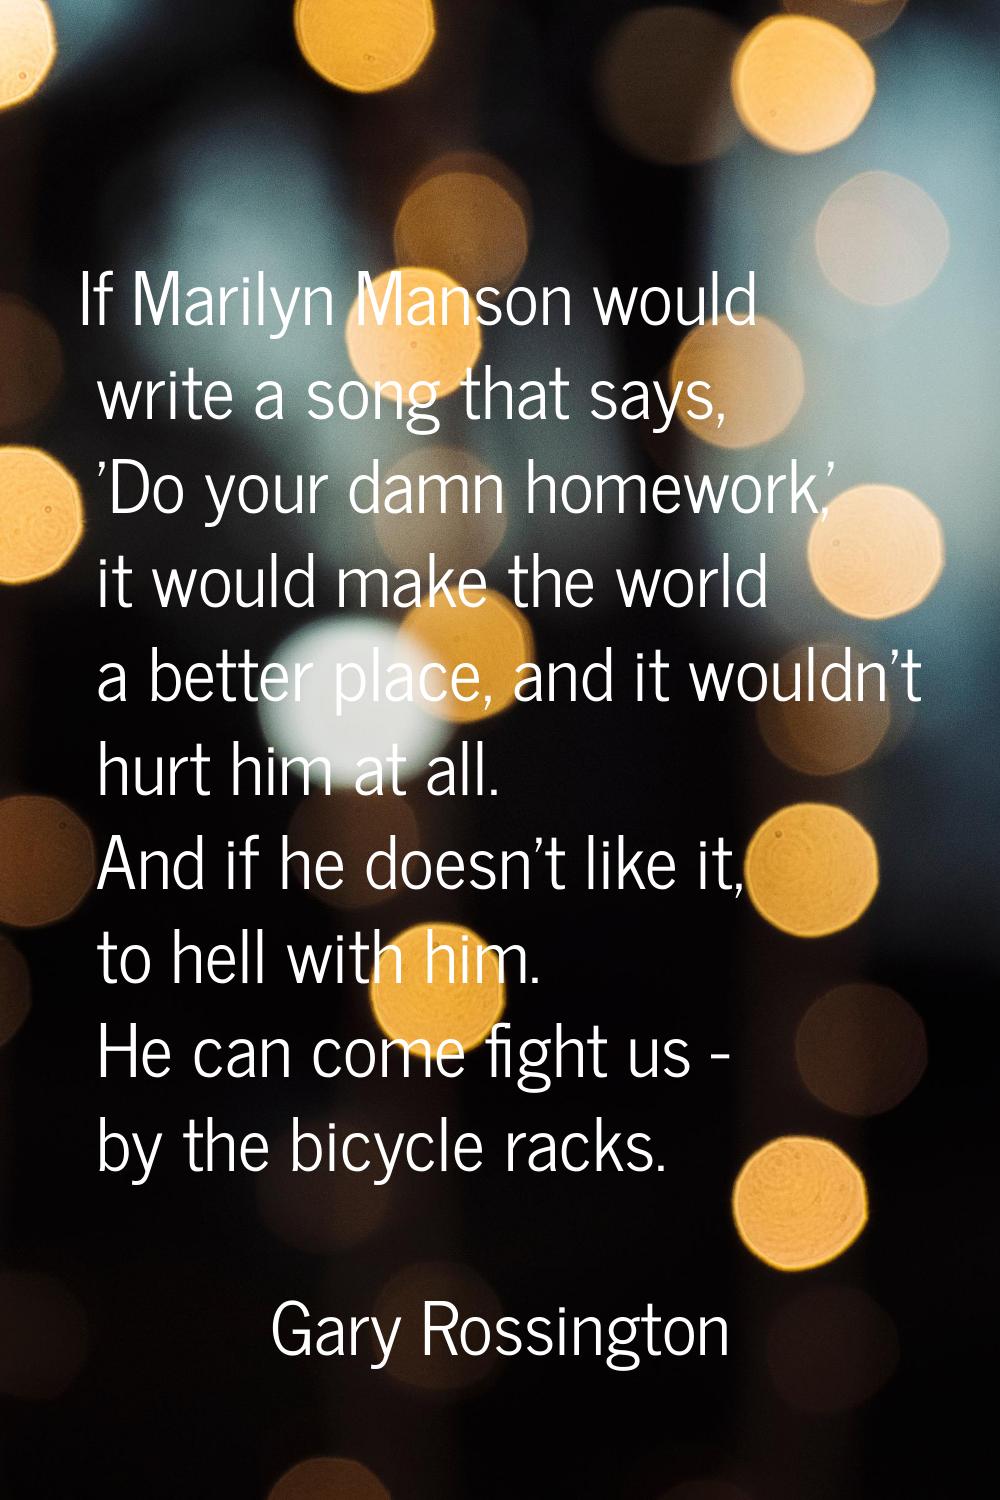 If Marilyn Manson would write a song that says, 'Do your damn homework,' it would make the world a 